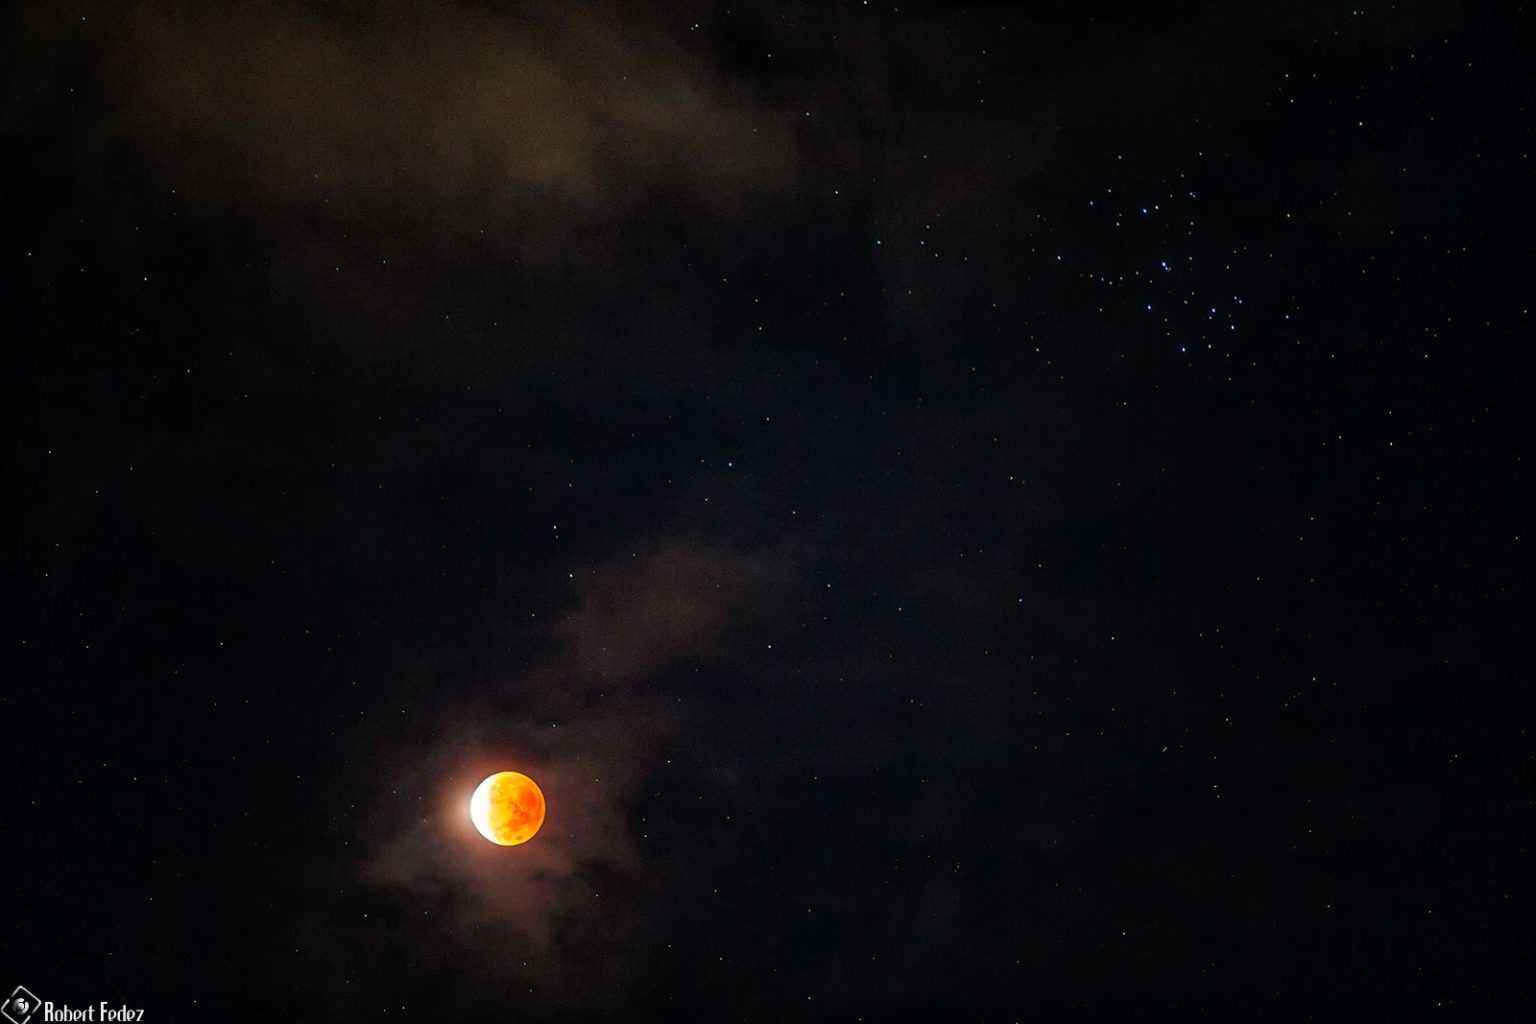 Stunning Telephoto Snapshot of an Almost Total Lunar Eclipse